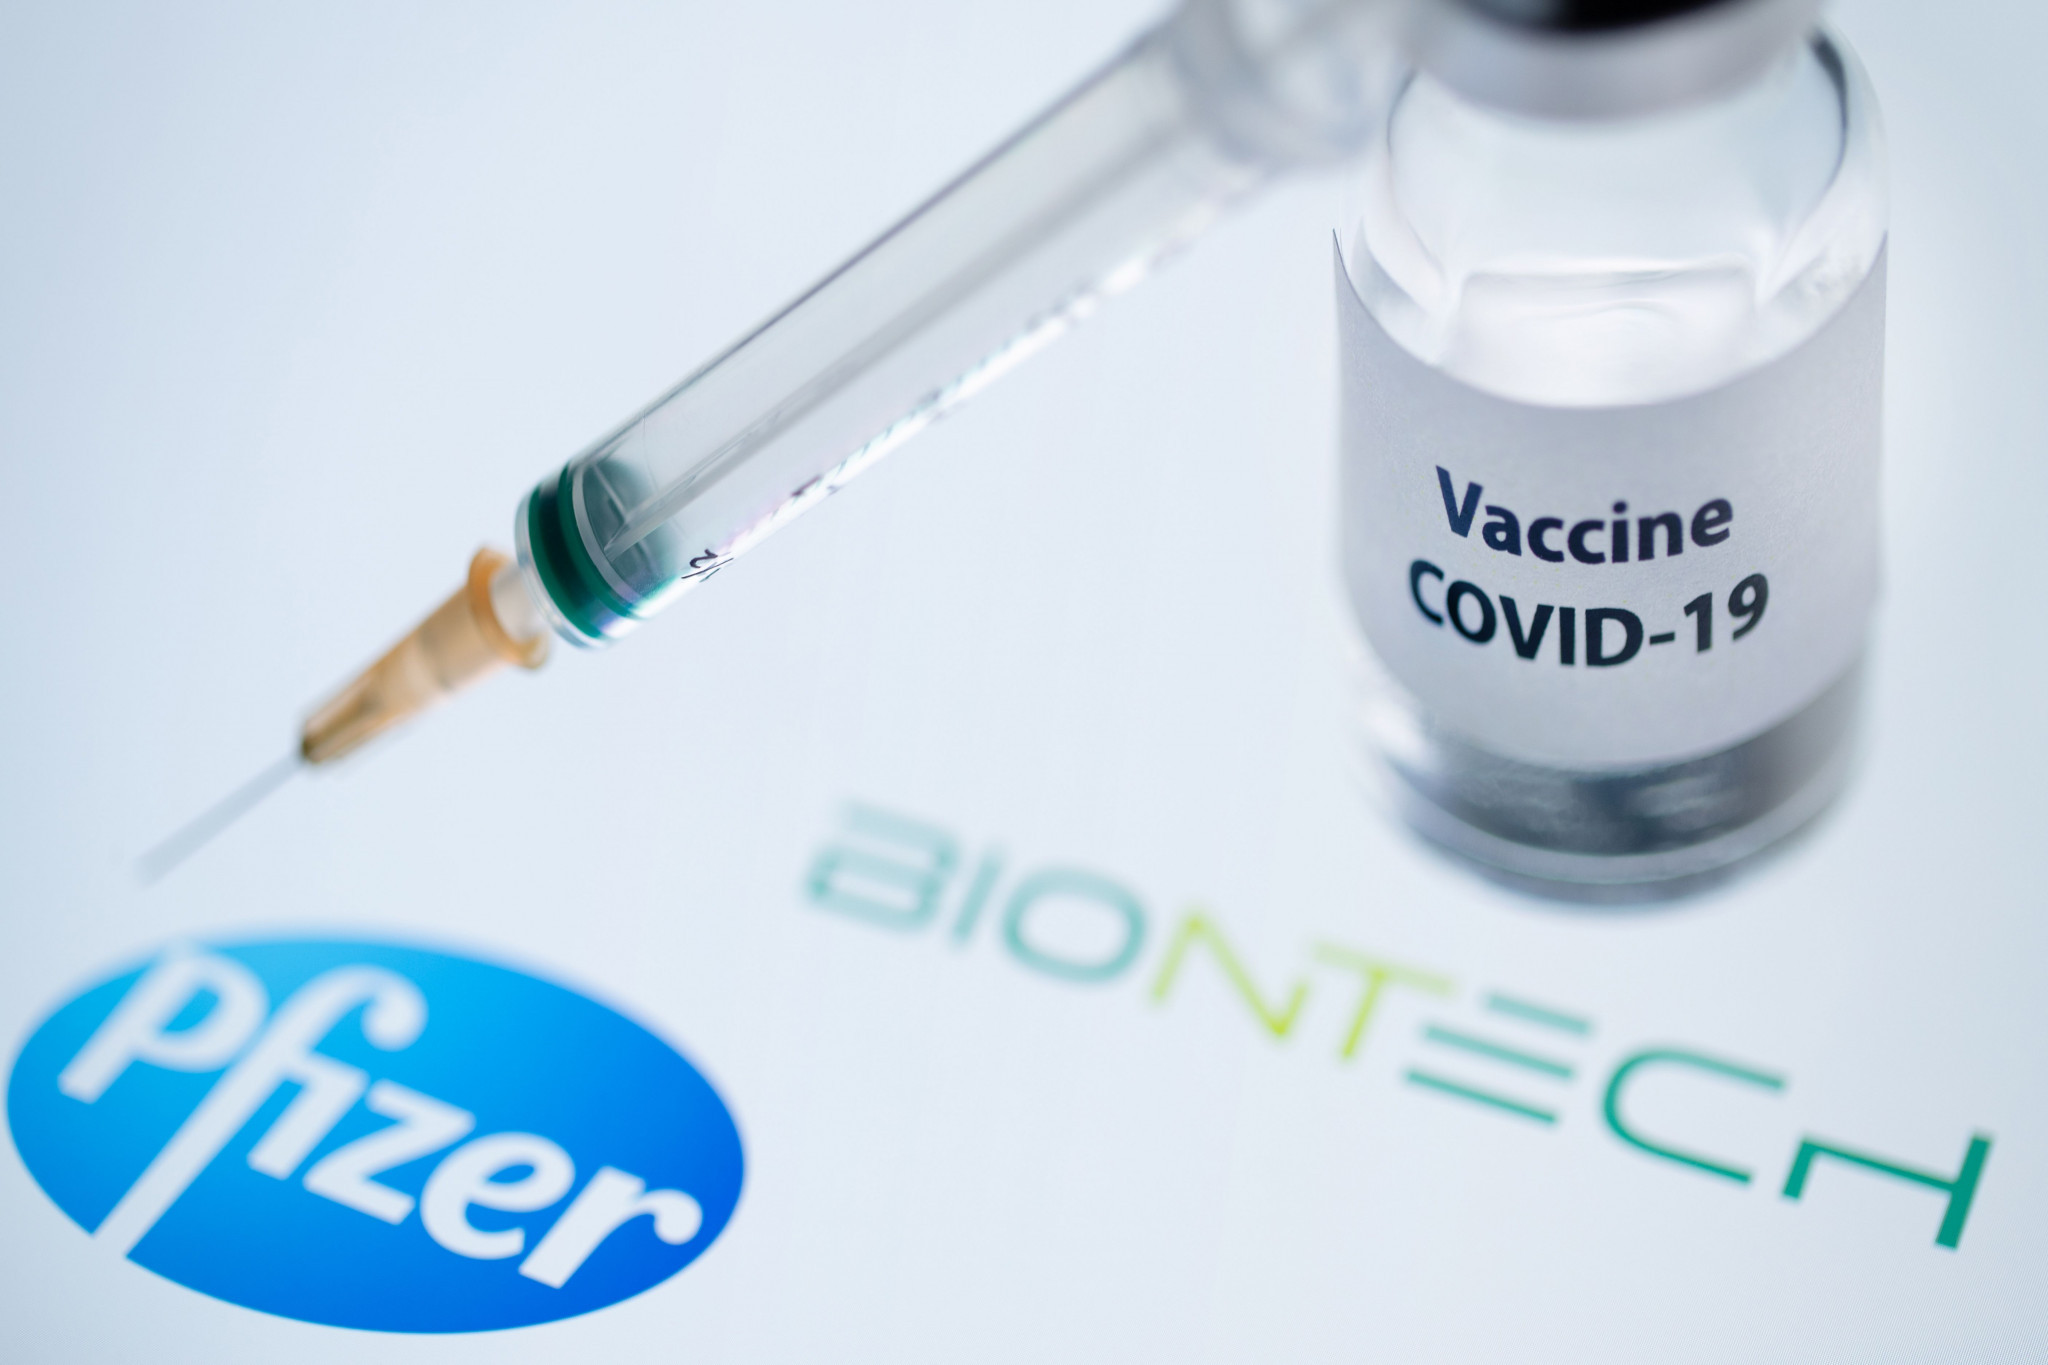 Sport faces difficult questions if athletes get vaccinated for COVID-19 before the most vulnerable  ©Getty Images